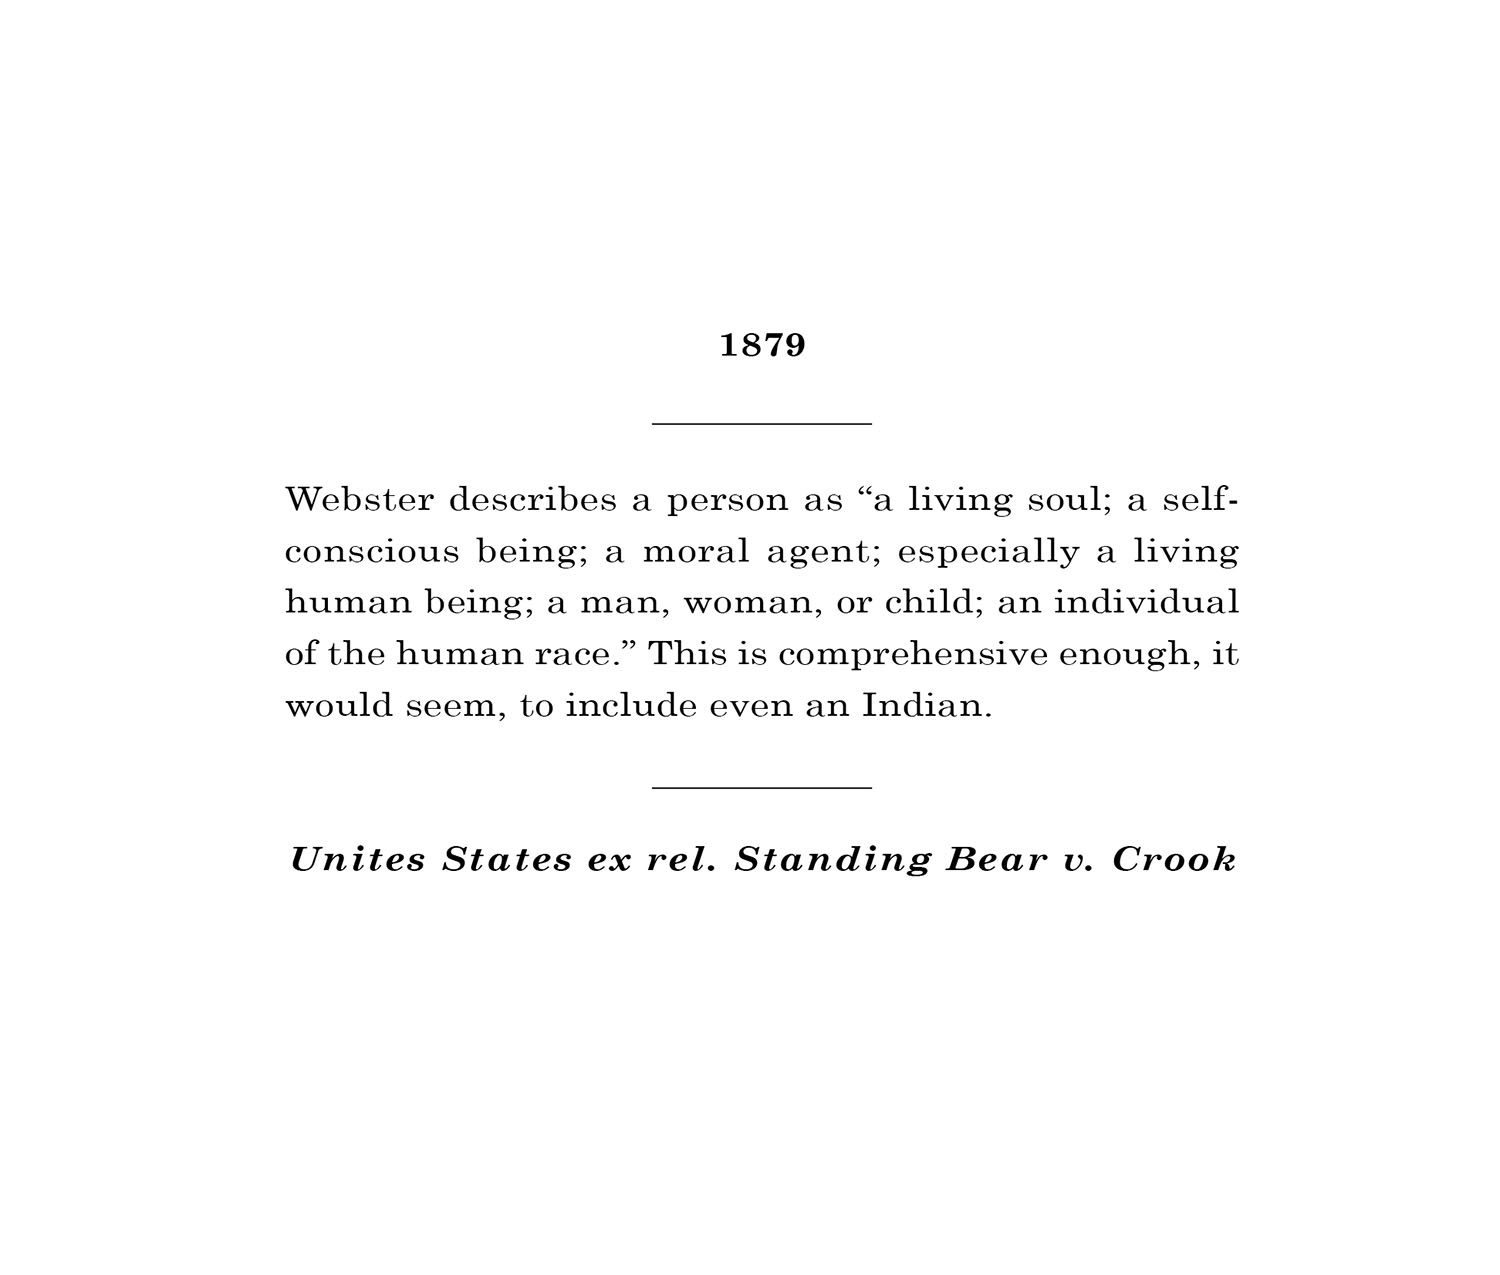 Webster describes a person as “a living soul; a self-conscious being; a moral agent; especially a living human being; a man, woman, or child; an individual of the human race.” This is comprehensive enough, it would seem, to include even an Indian. – Unites States ex rel. Standing Bear v. Crook (1879)